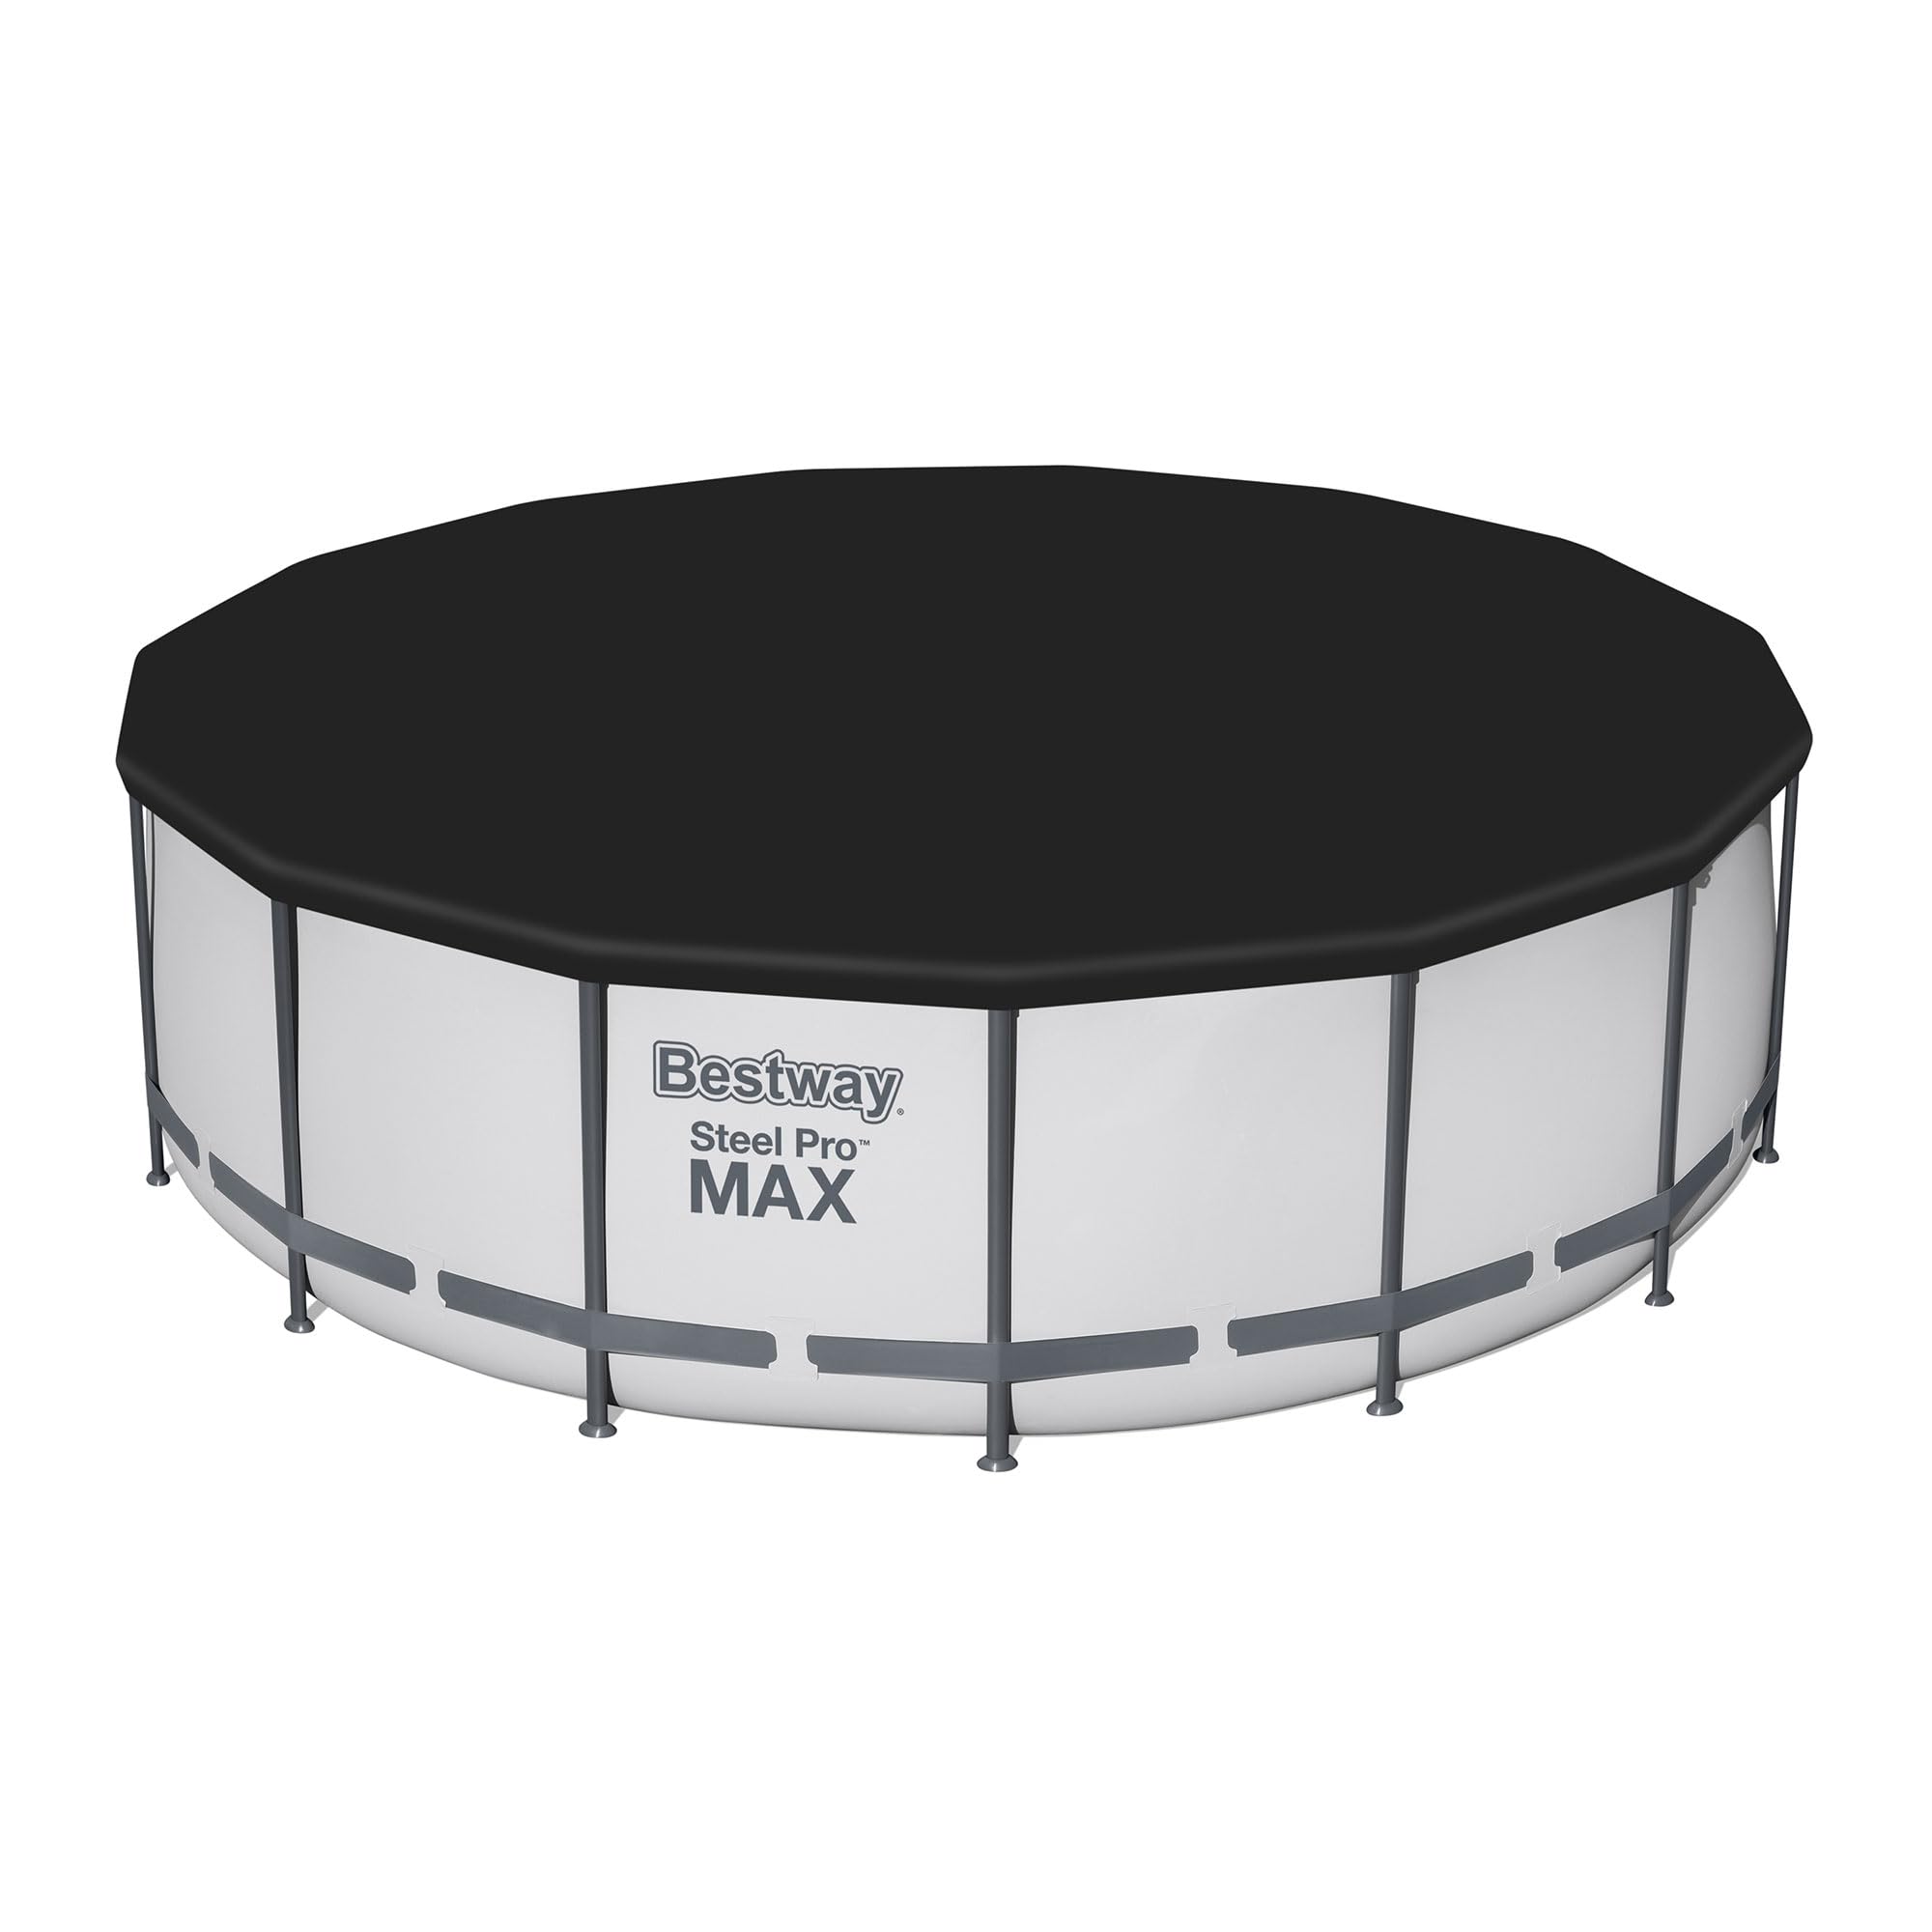 Bestway Steel Pro MAX 15 Foot by 48 Inches Round Above Ground Family Swimming Pool Set Outdoor Steel Frame with Filter, Pump, Ladder, and Cover, Gray